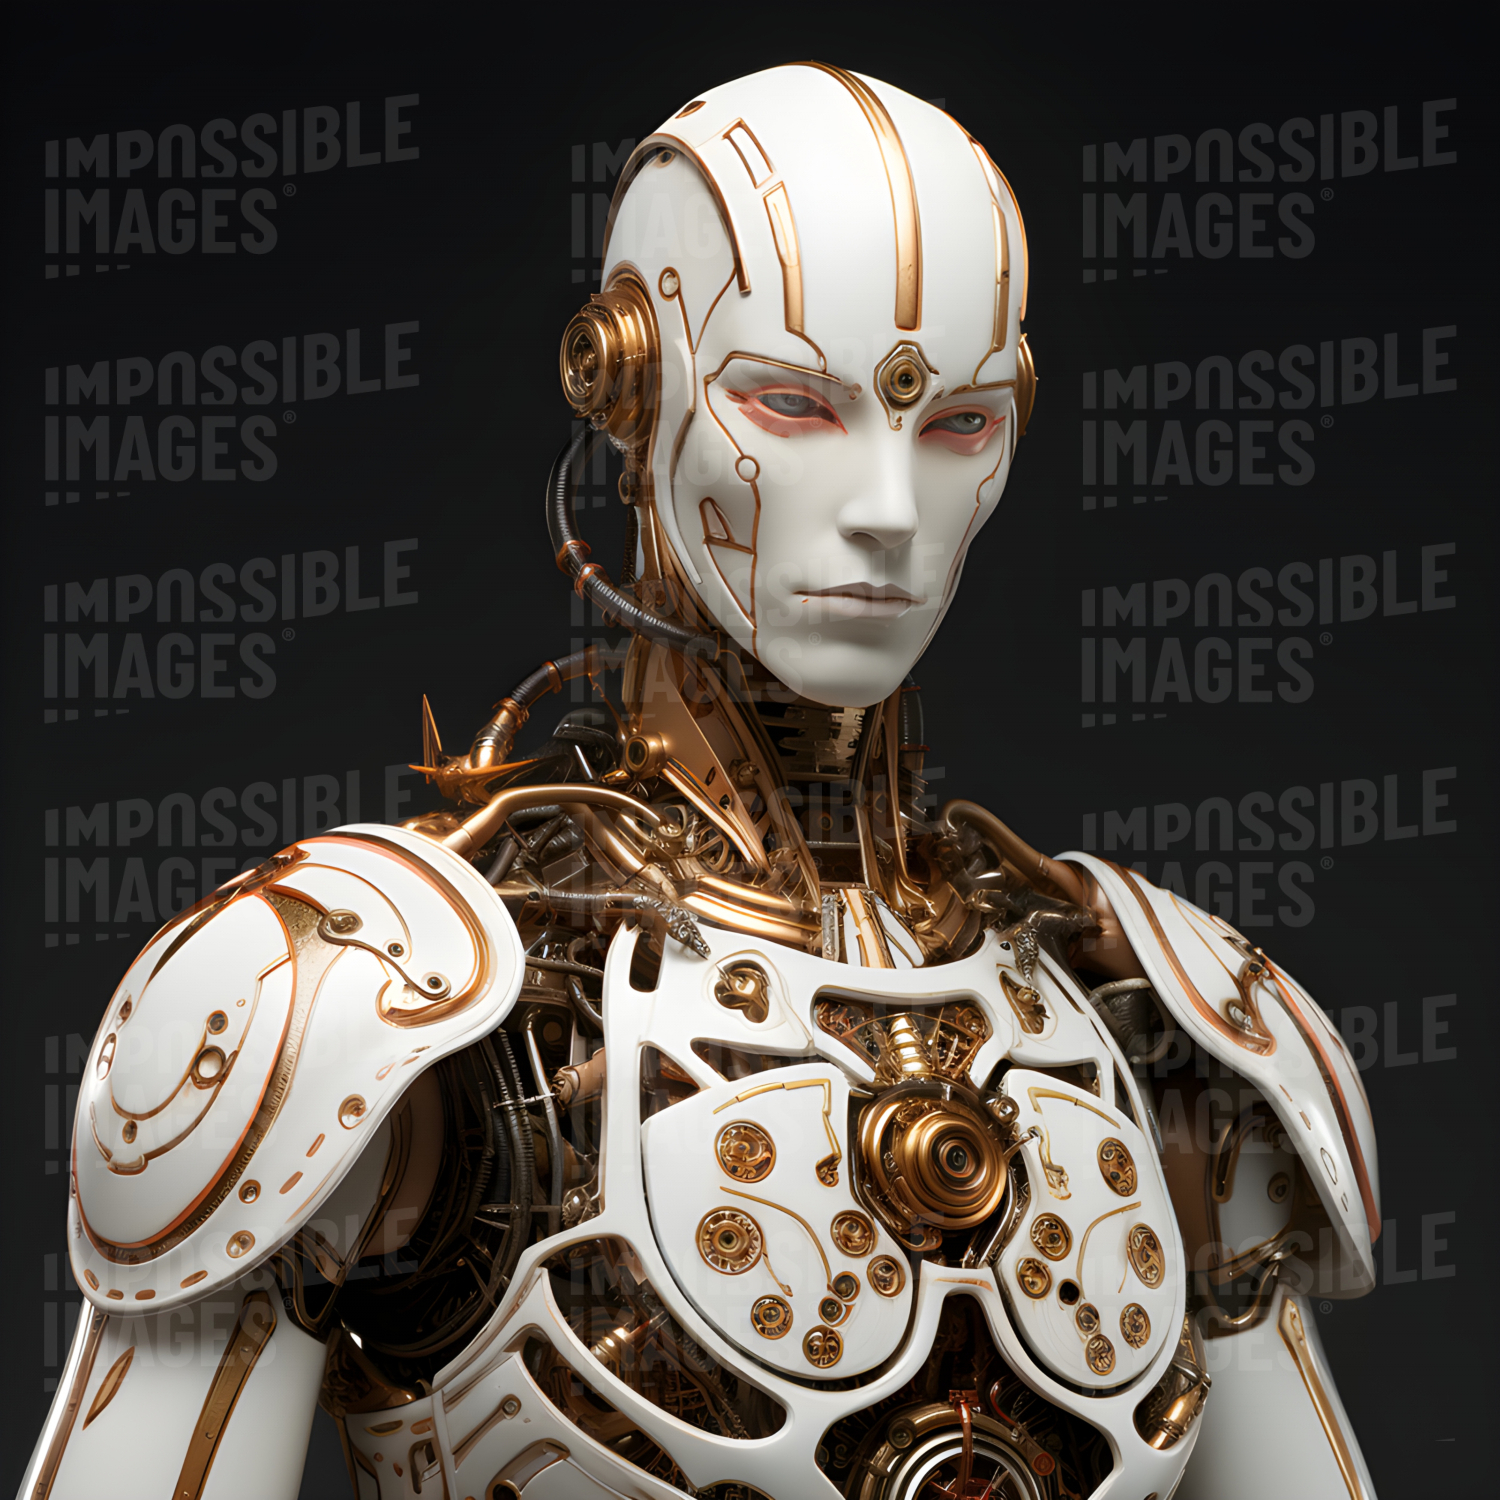 Ornate white and gold clockwork humanoid robot -  An ornate white and gold humanoid robot, crafted from intricate clockwork parts, stands motionless, ready to be brought to life.